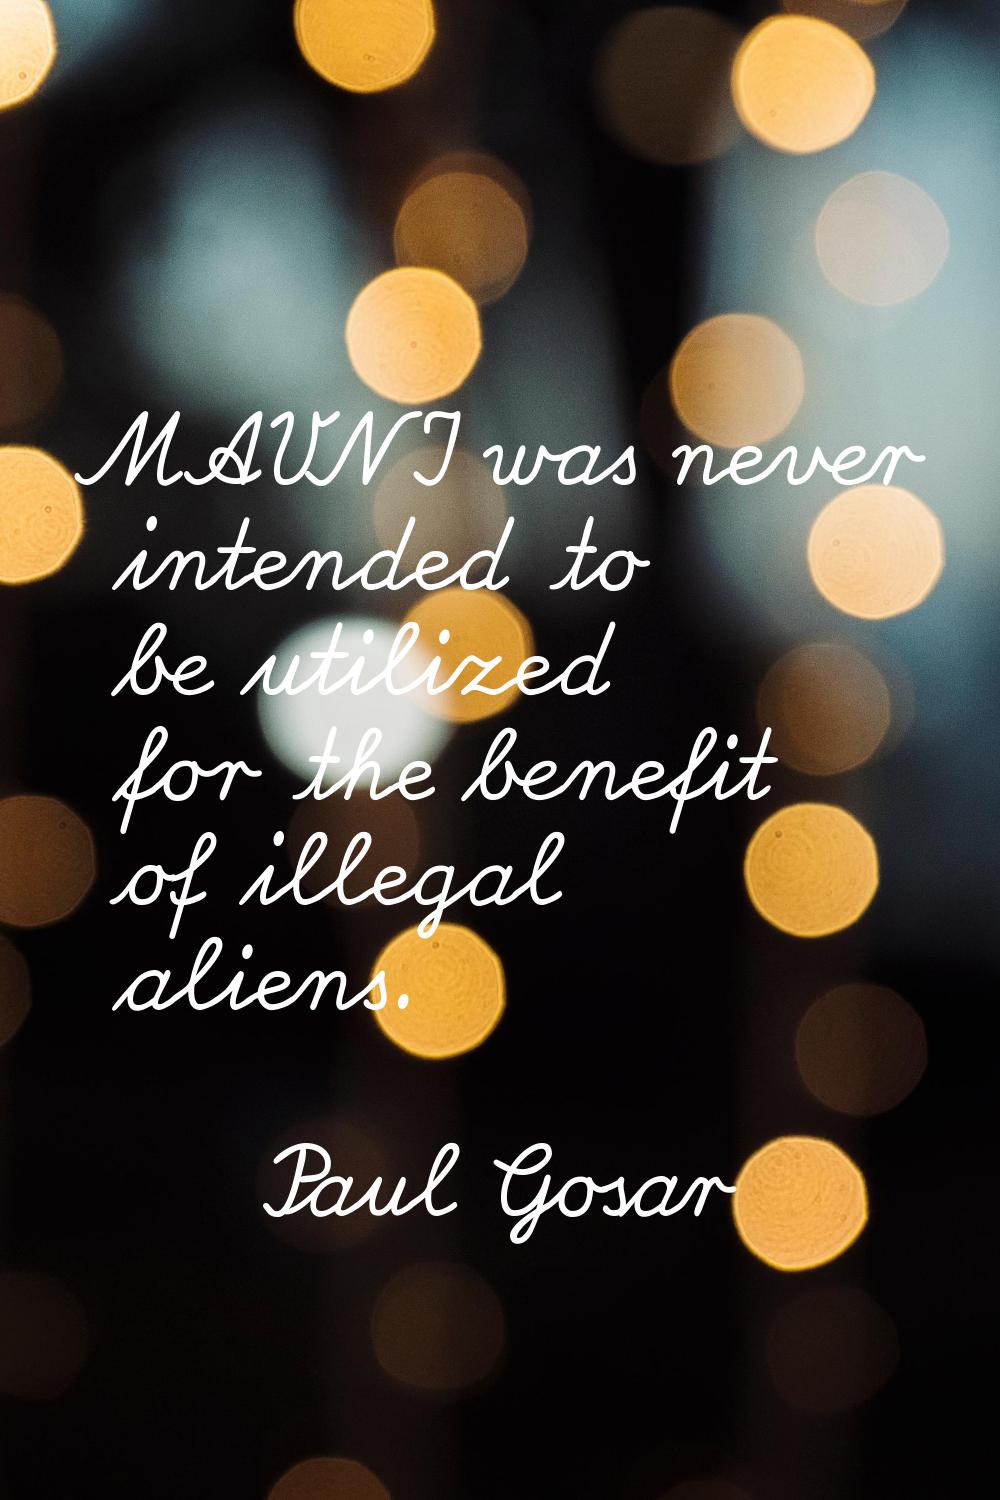 MAVNI was never intended to be utilized for the benefit of illegal aliens.